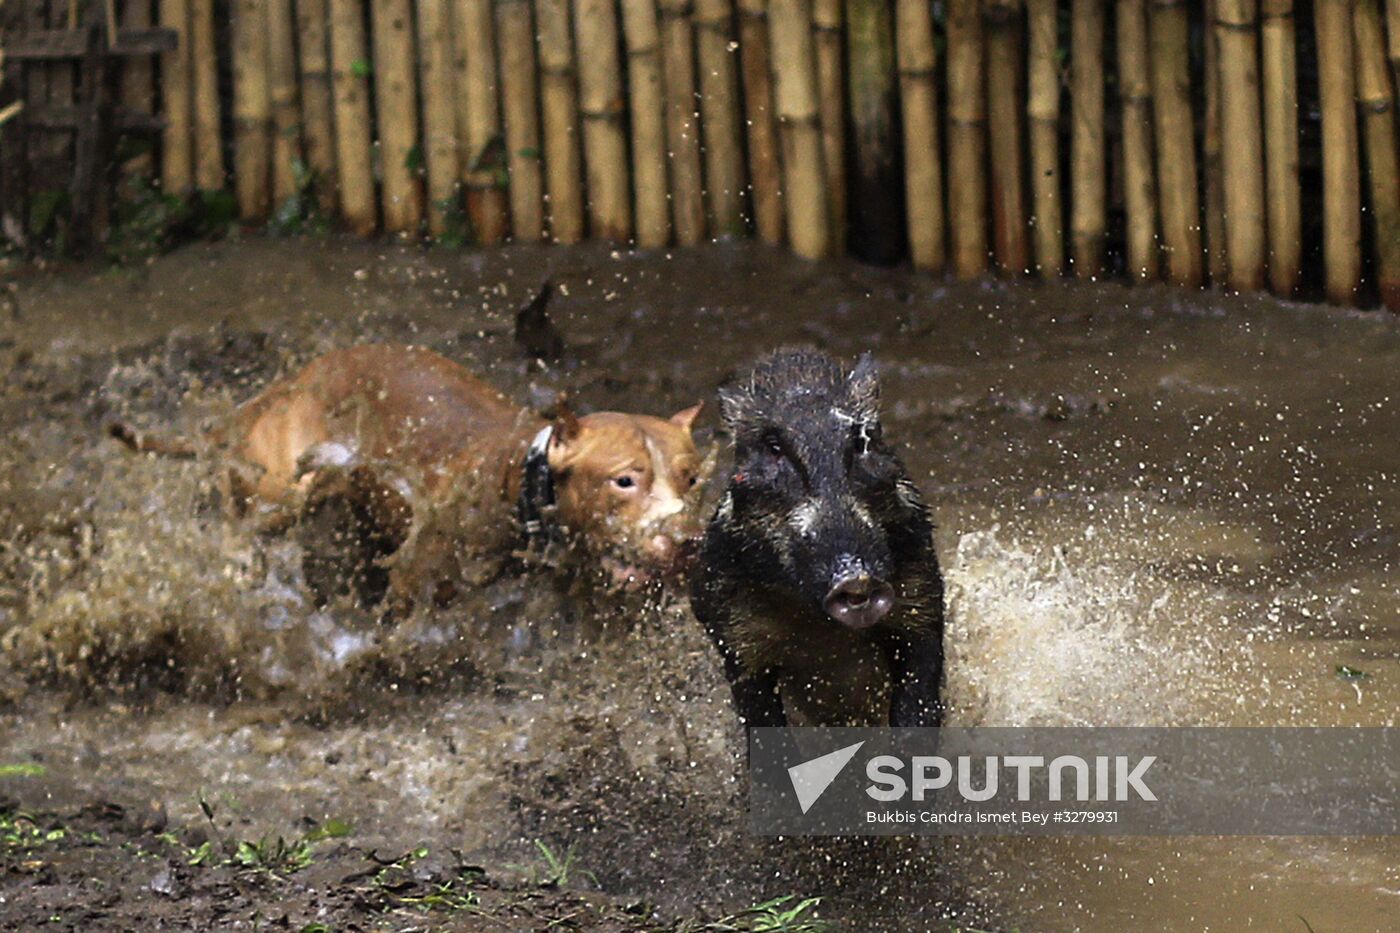 Bandung Adu Bagong tournament pits wild boars against dogs in Indonesia